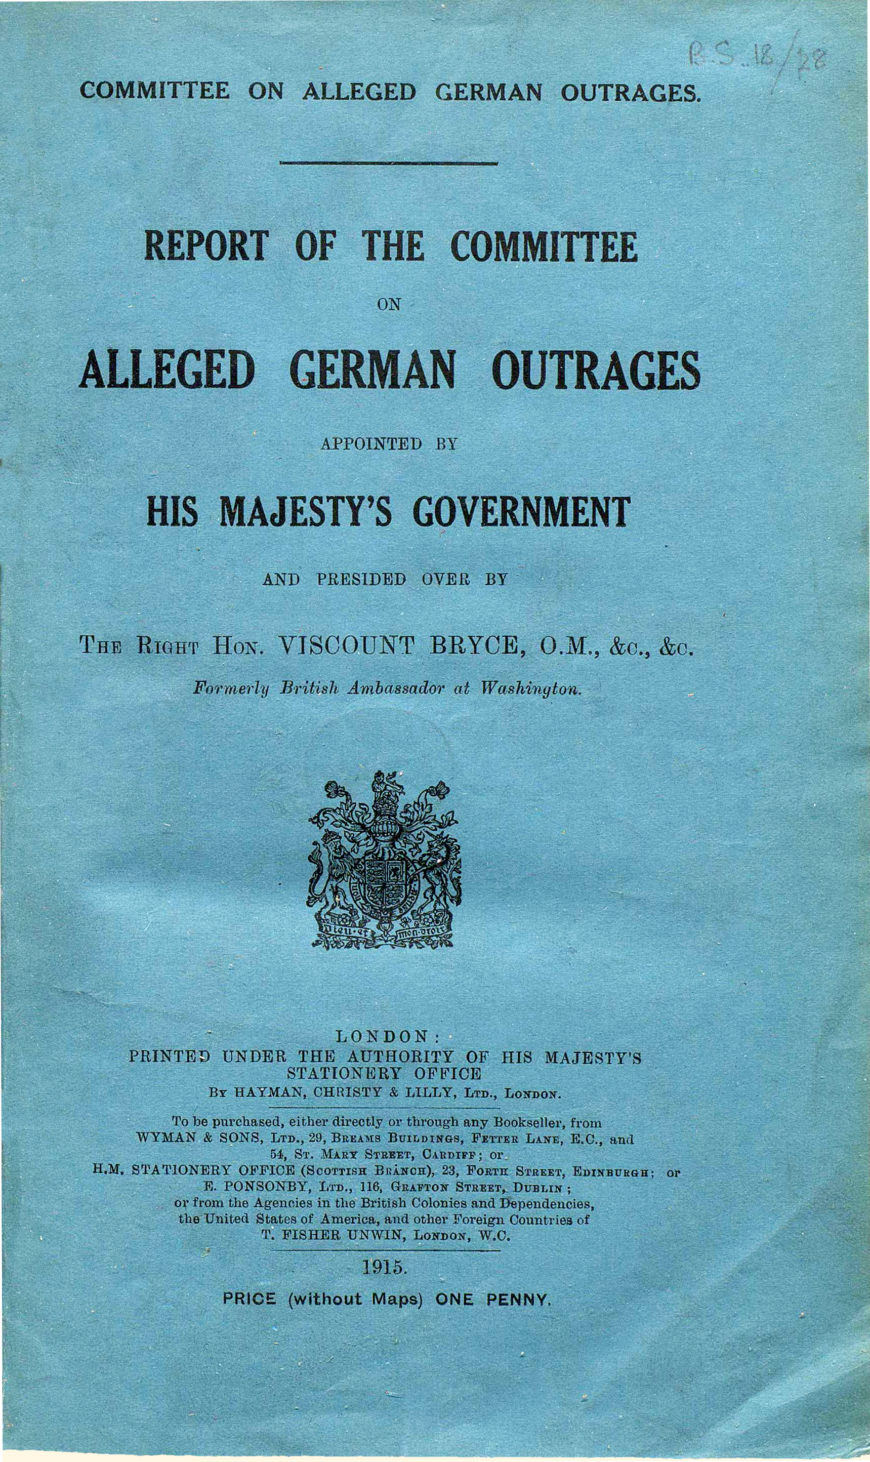 The Bryce Report, 1915 (British Library)